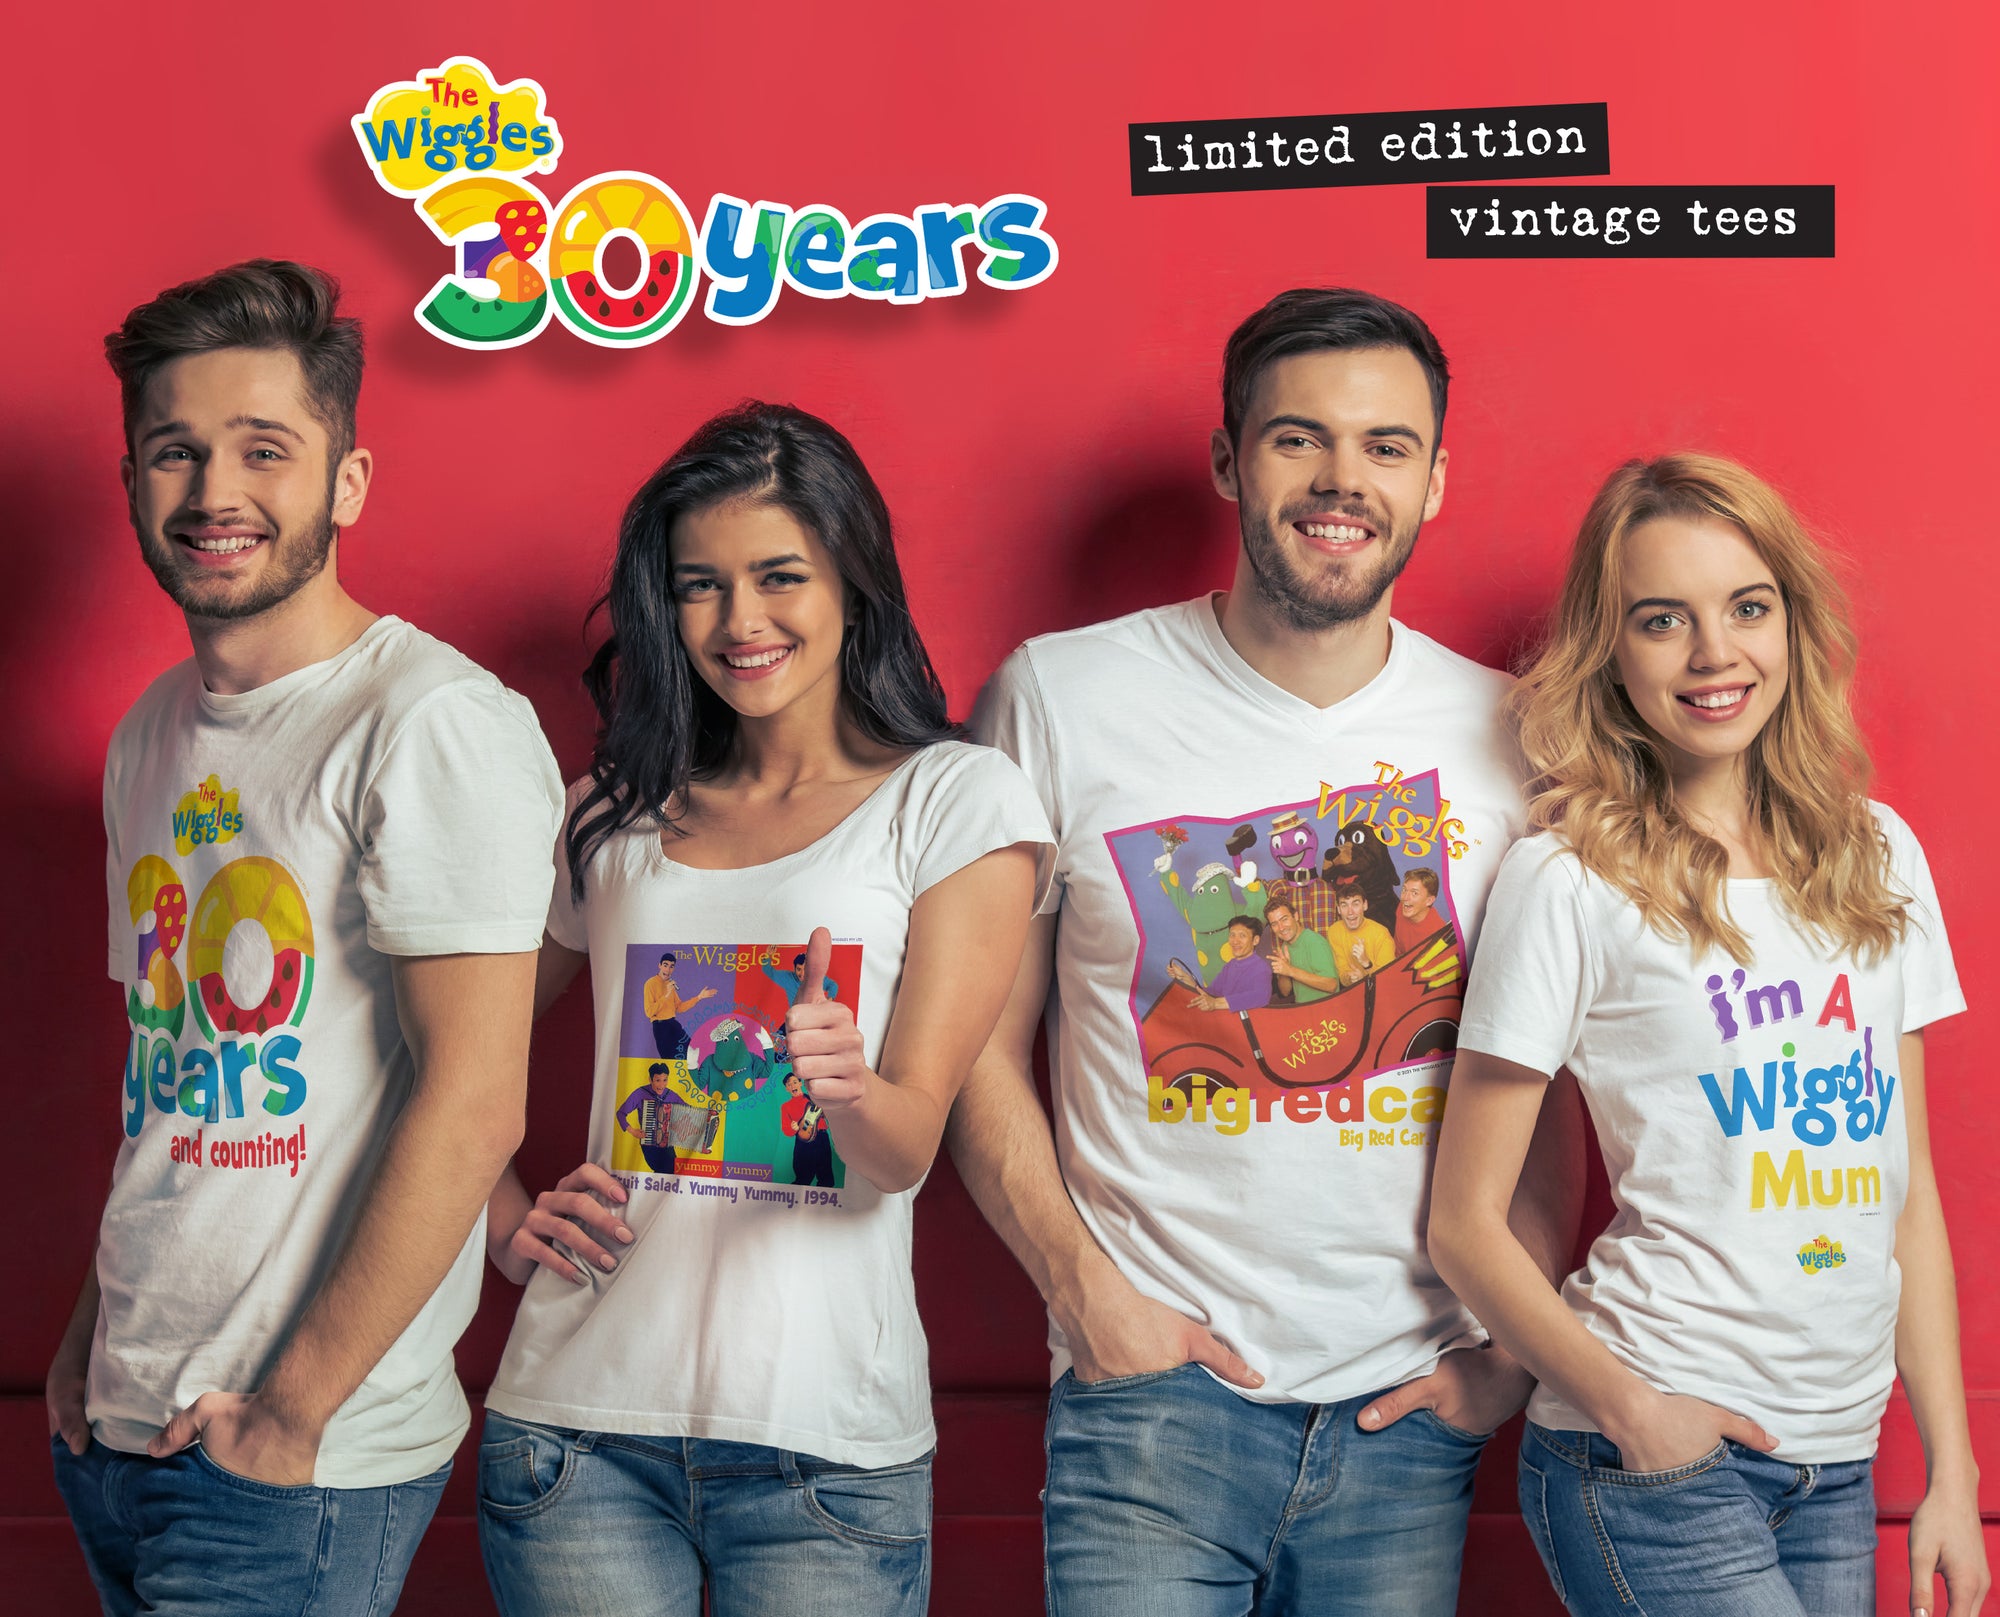 The Wiggles 30 Years